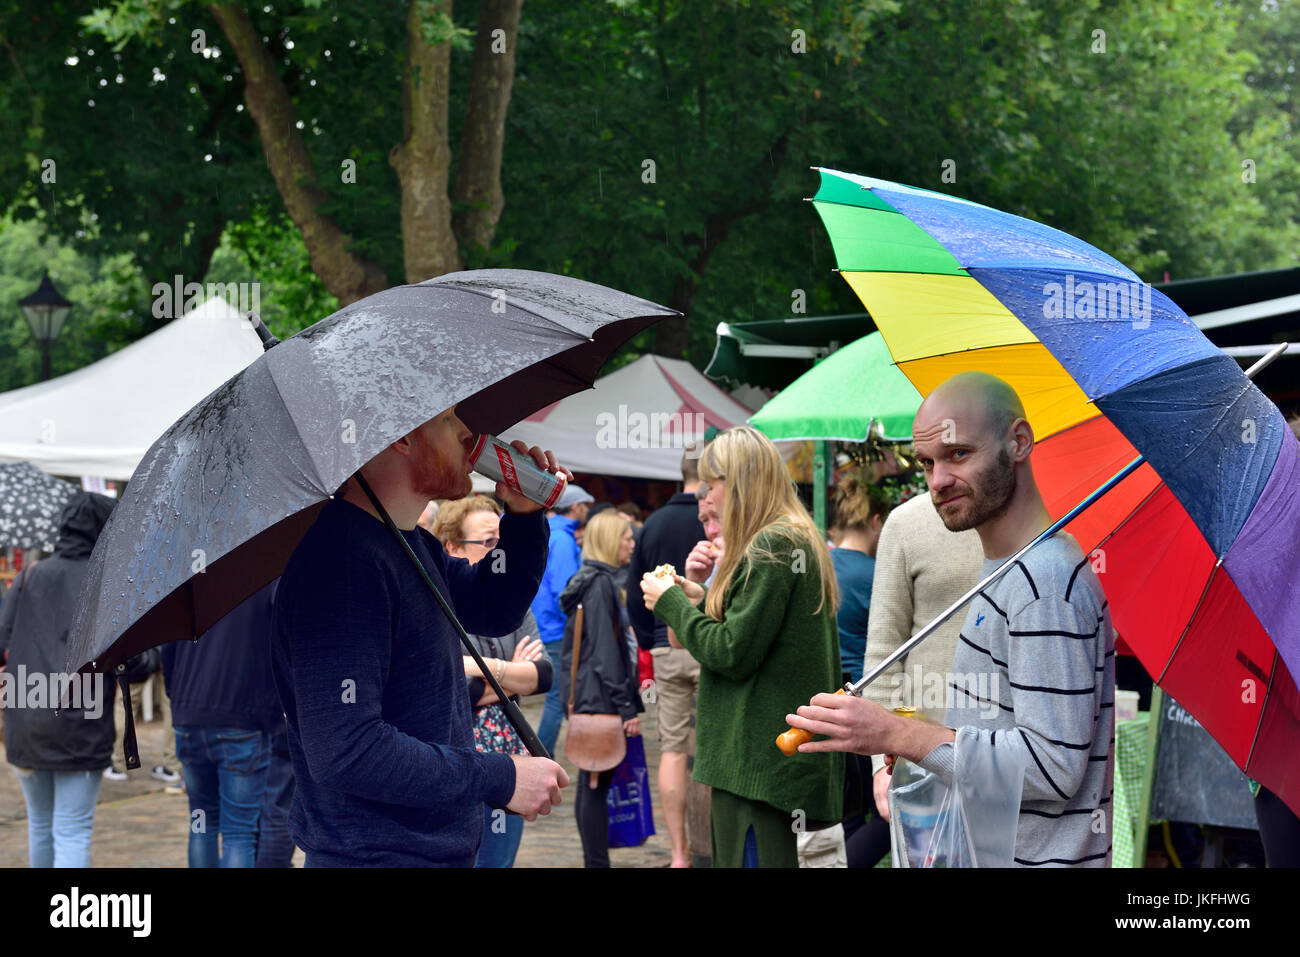 Bristol, UK. 23rd July, 2017. Rather mixed starting with heavy rain before the festival opened at 12:00 which then cleared to mixed sunshine and cloud. By 16:00 the forecasts were correct and a downpour commenced easing off at the official closing time for the festival. These two men came prepared with large umbrellas. © Charles Stirling/Alamy Live News. Credit: Charles Stirling/Alamy Live News Stock Photo